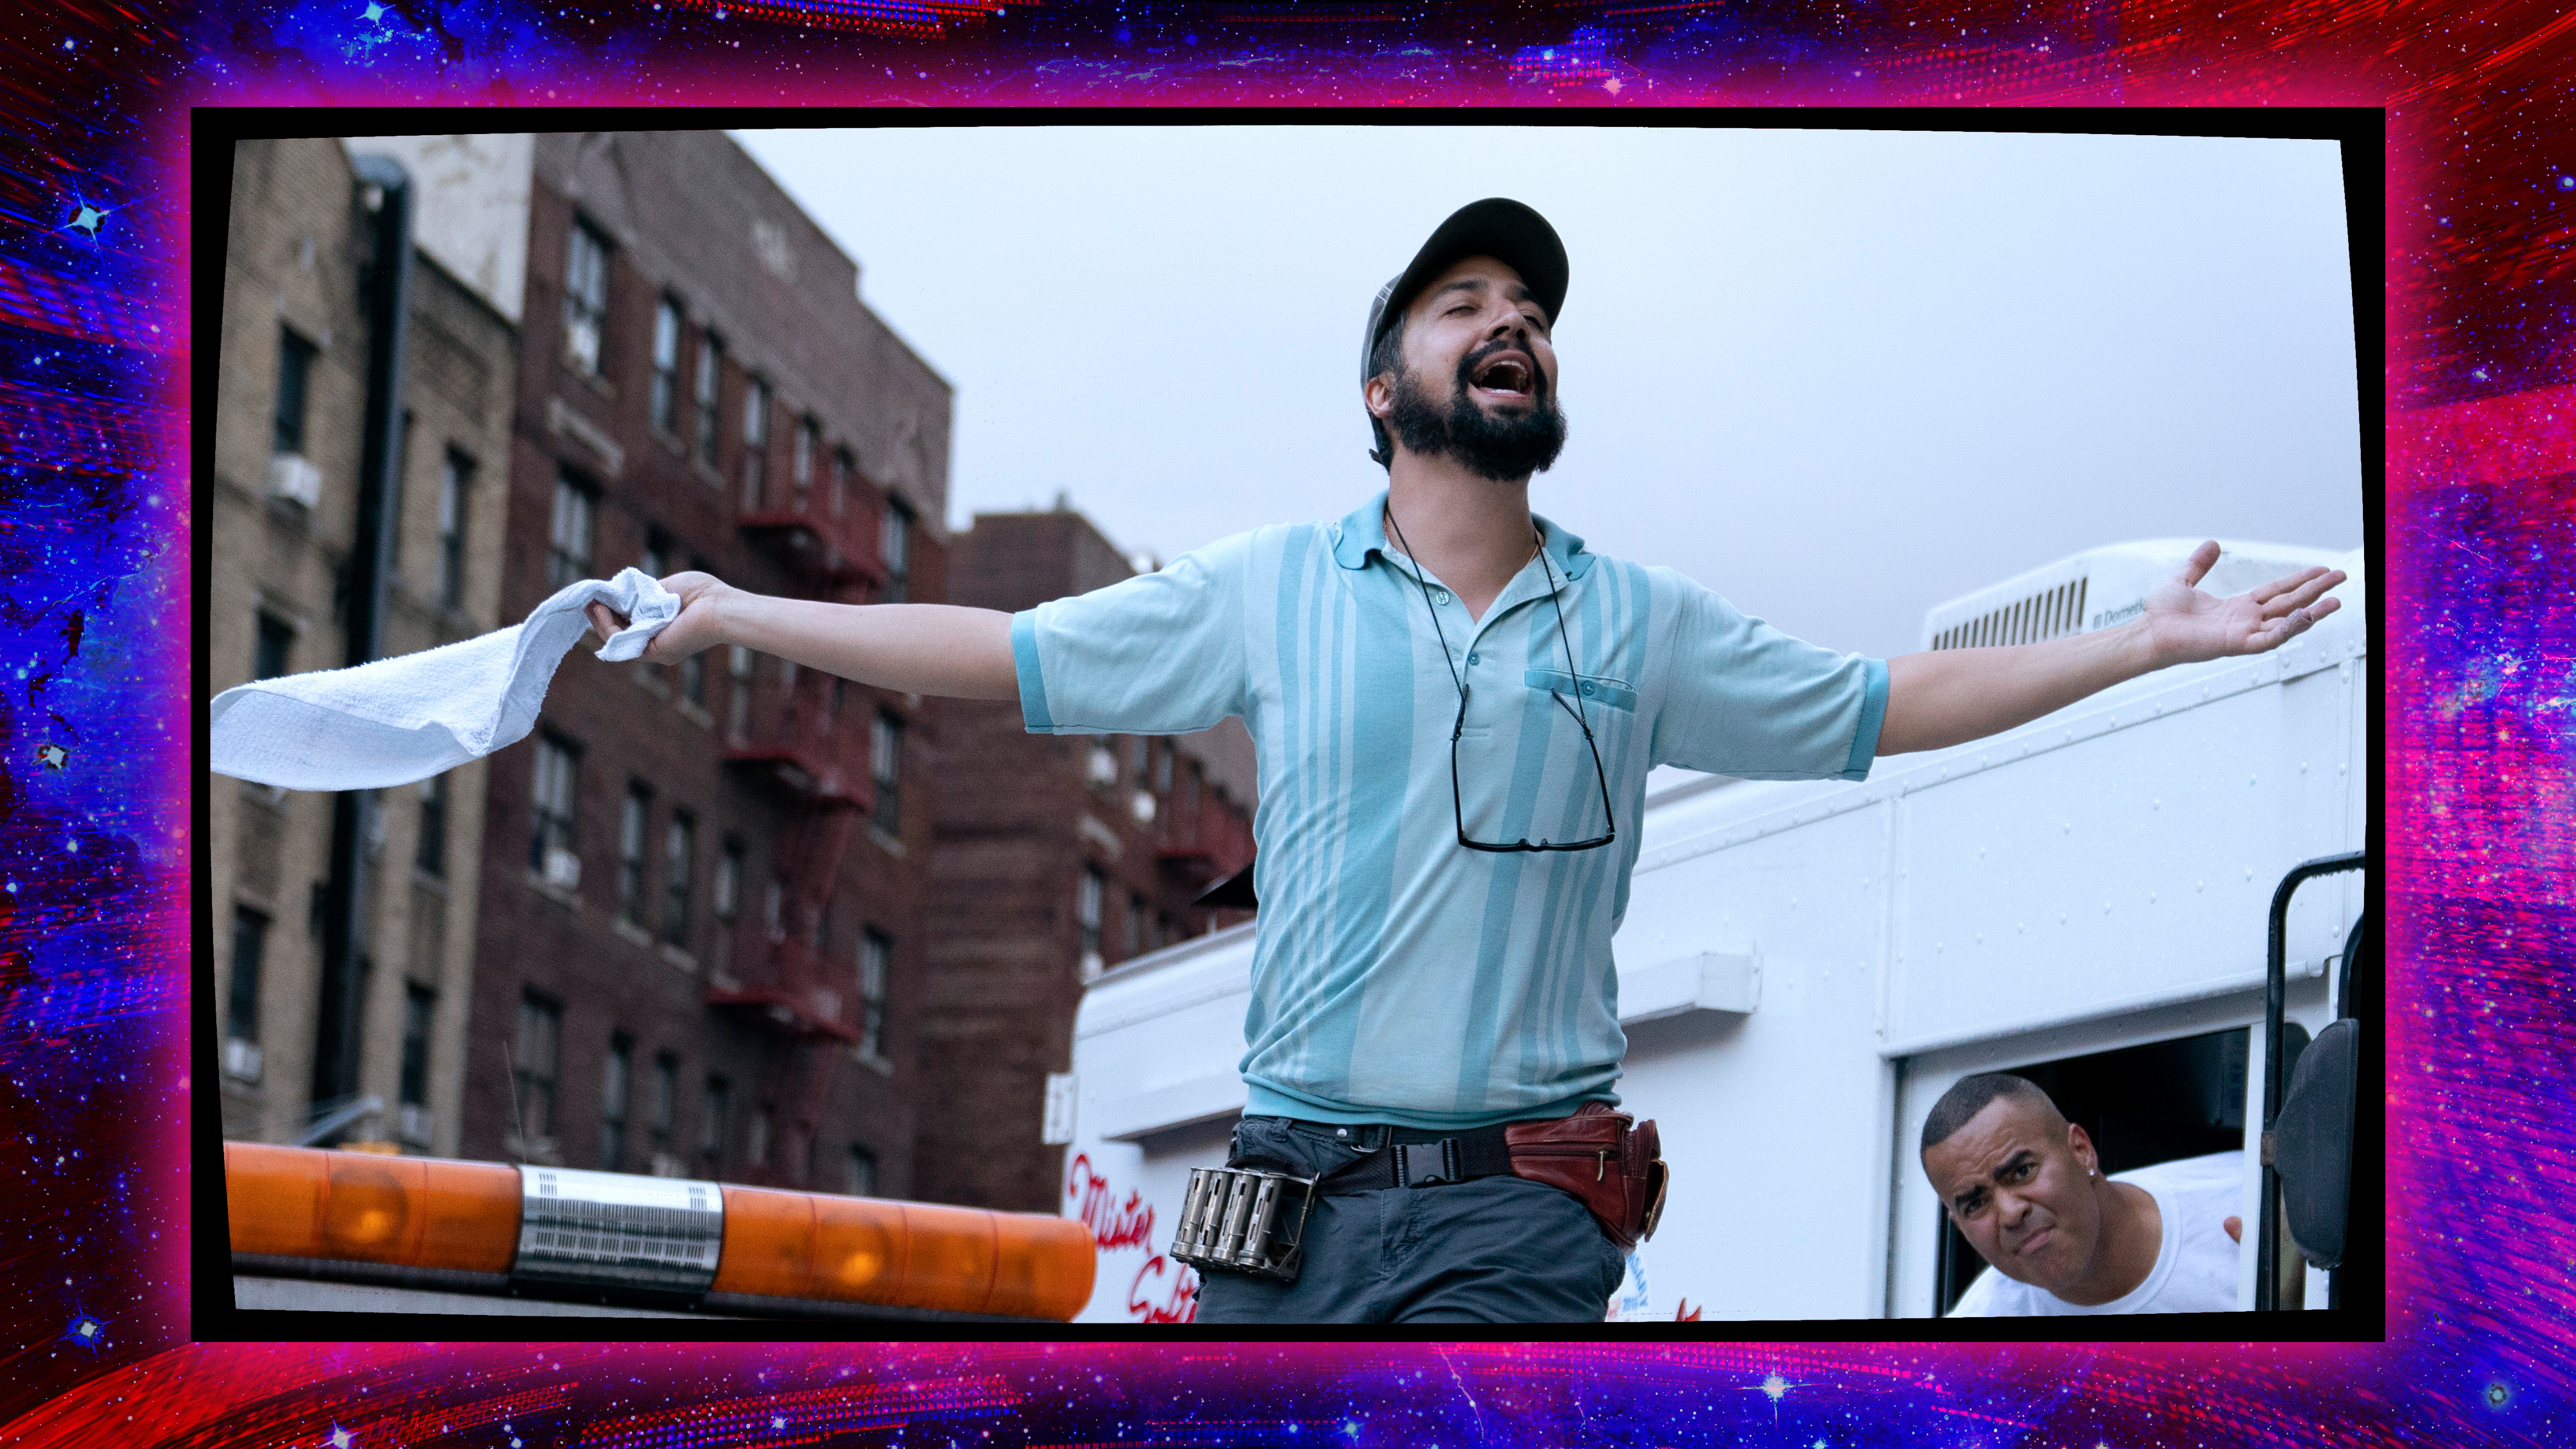 Photo of Lin-Manuel Miranda from “In the Heights” with a glitchy purple border